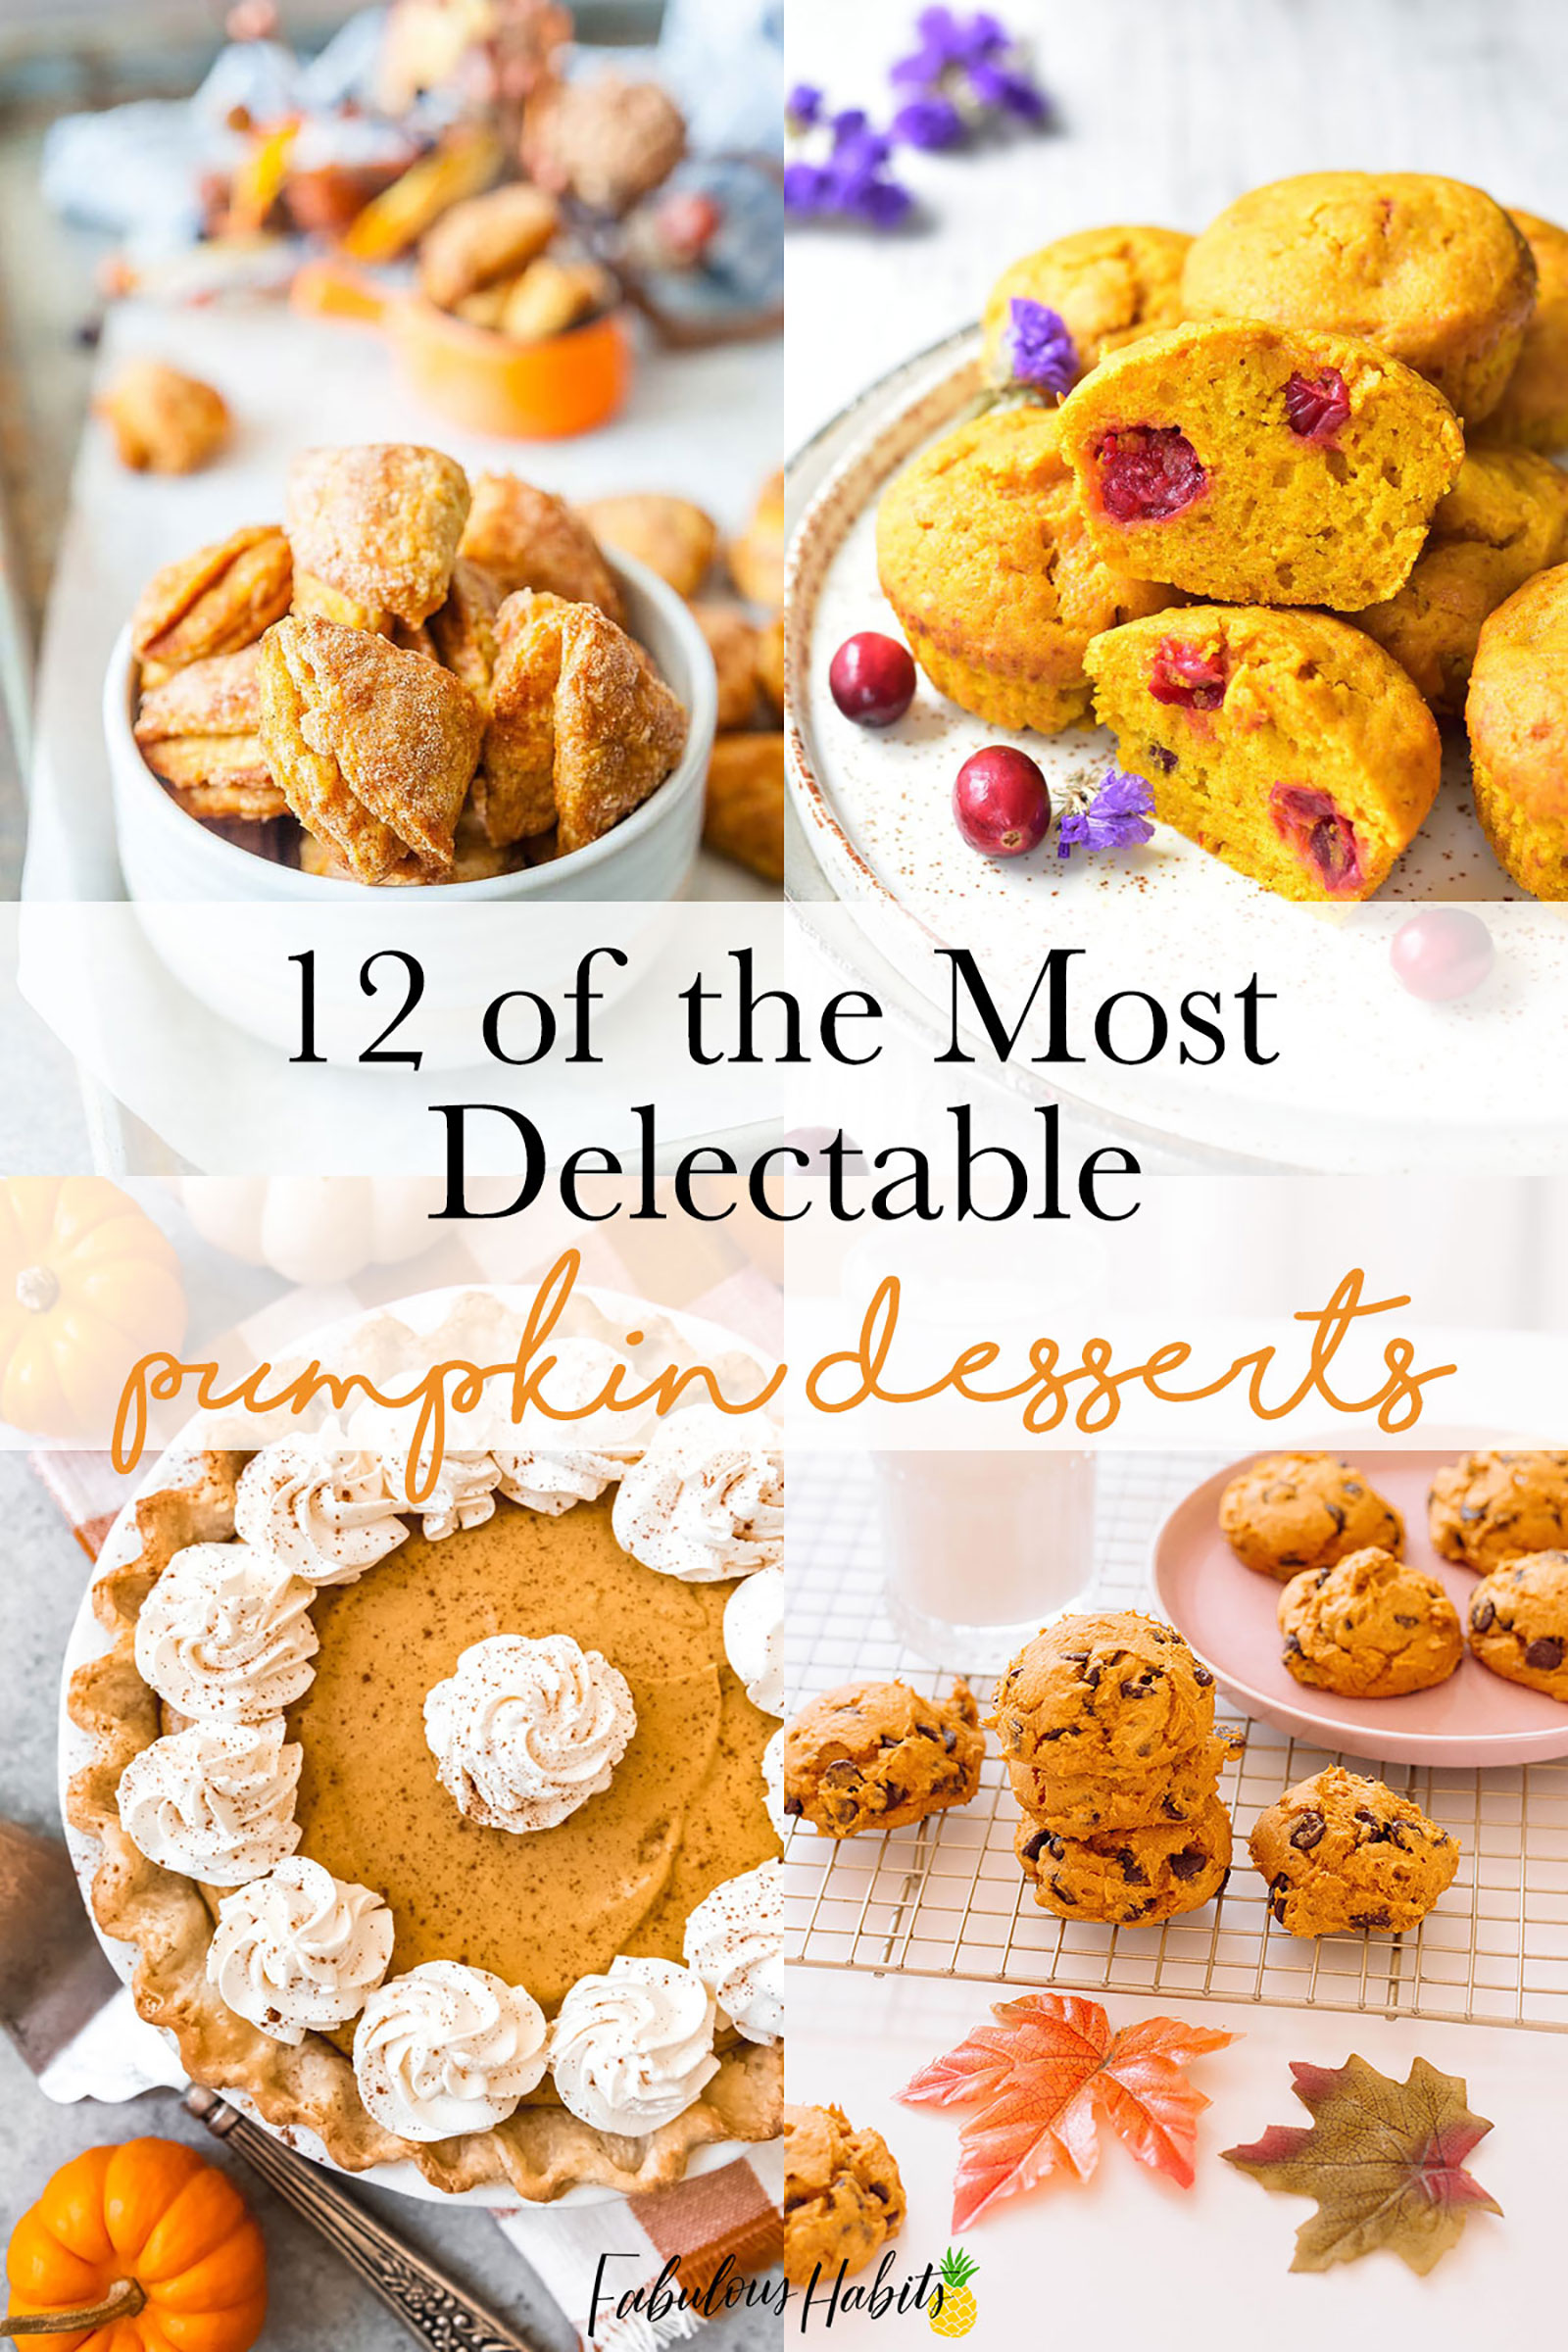 It's pumpkin season! Today, I rounded up some of the best pumpkin desserts out there - and they're waiting to be baked. So grab your aprons, reach for a whisk... we've got some baking to do! #pumpkindesserts